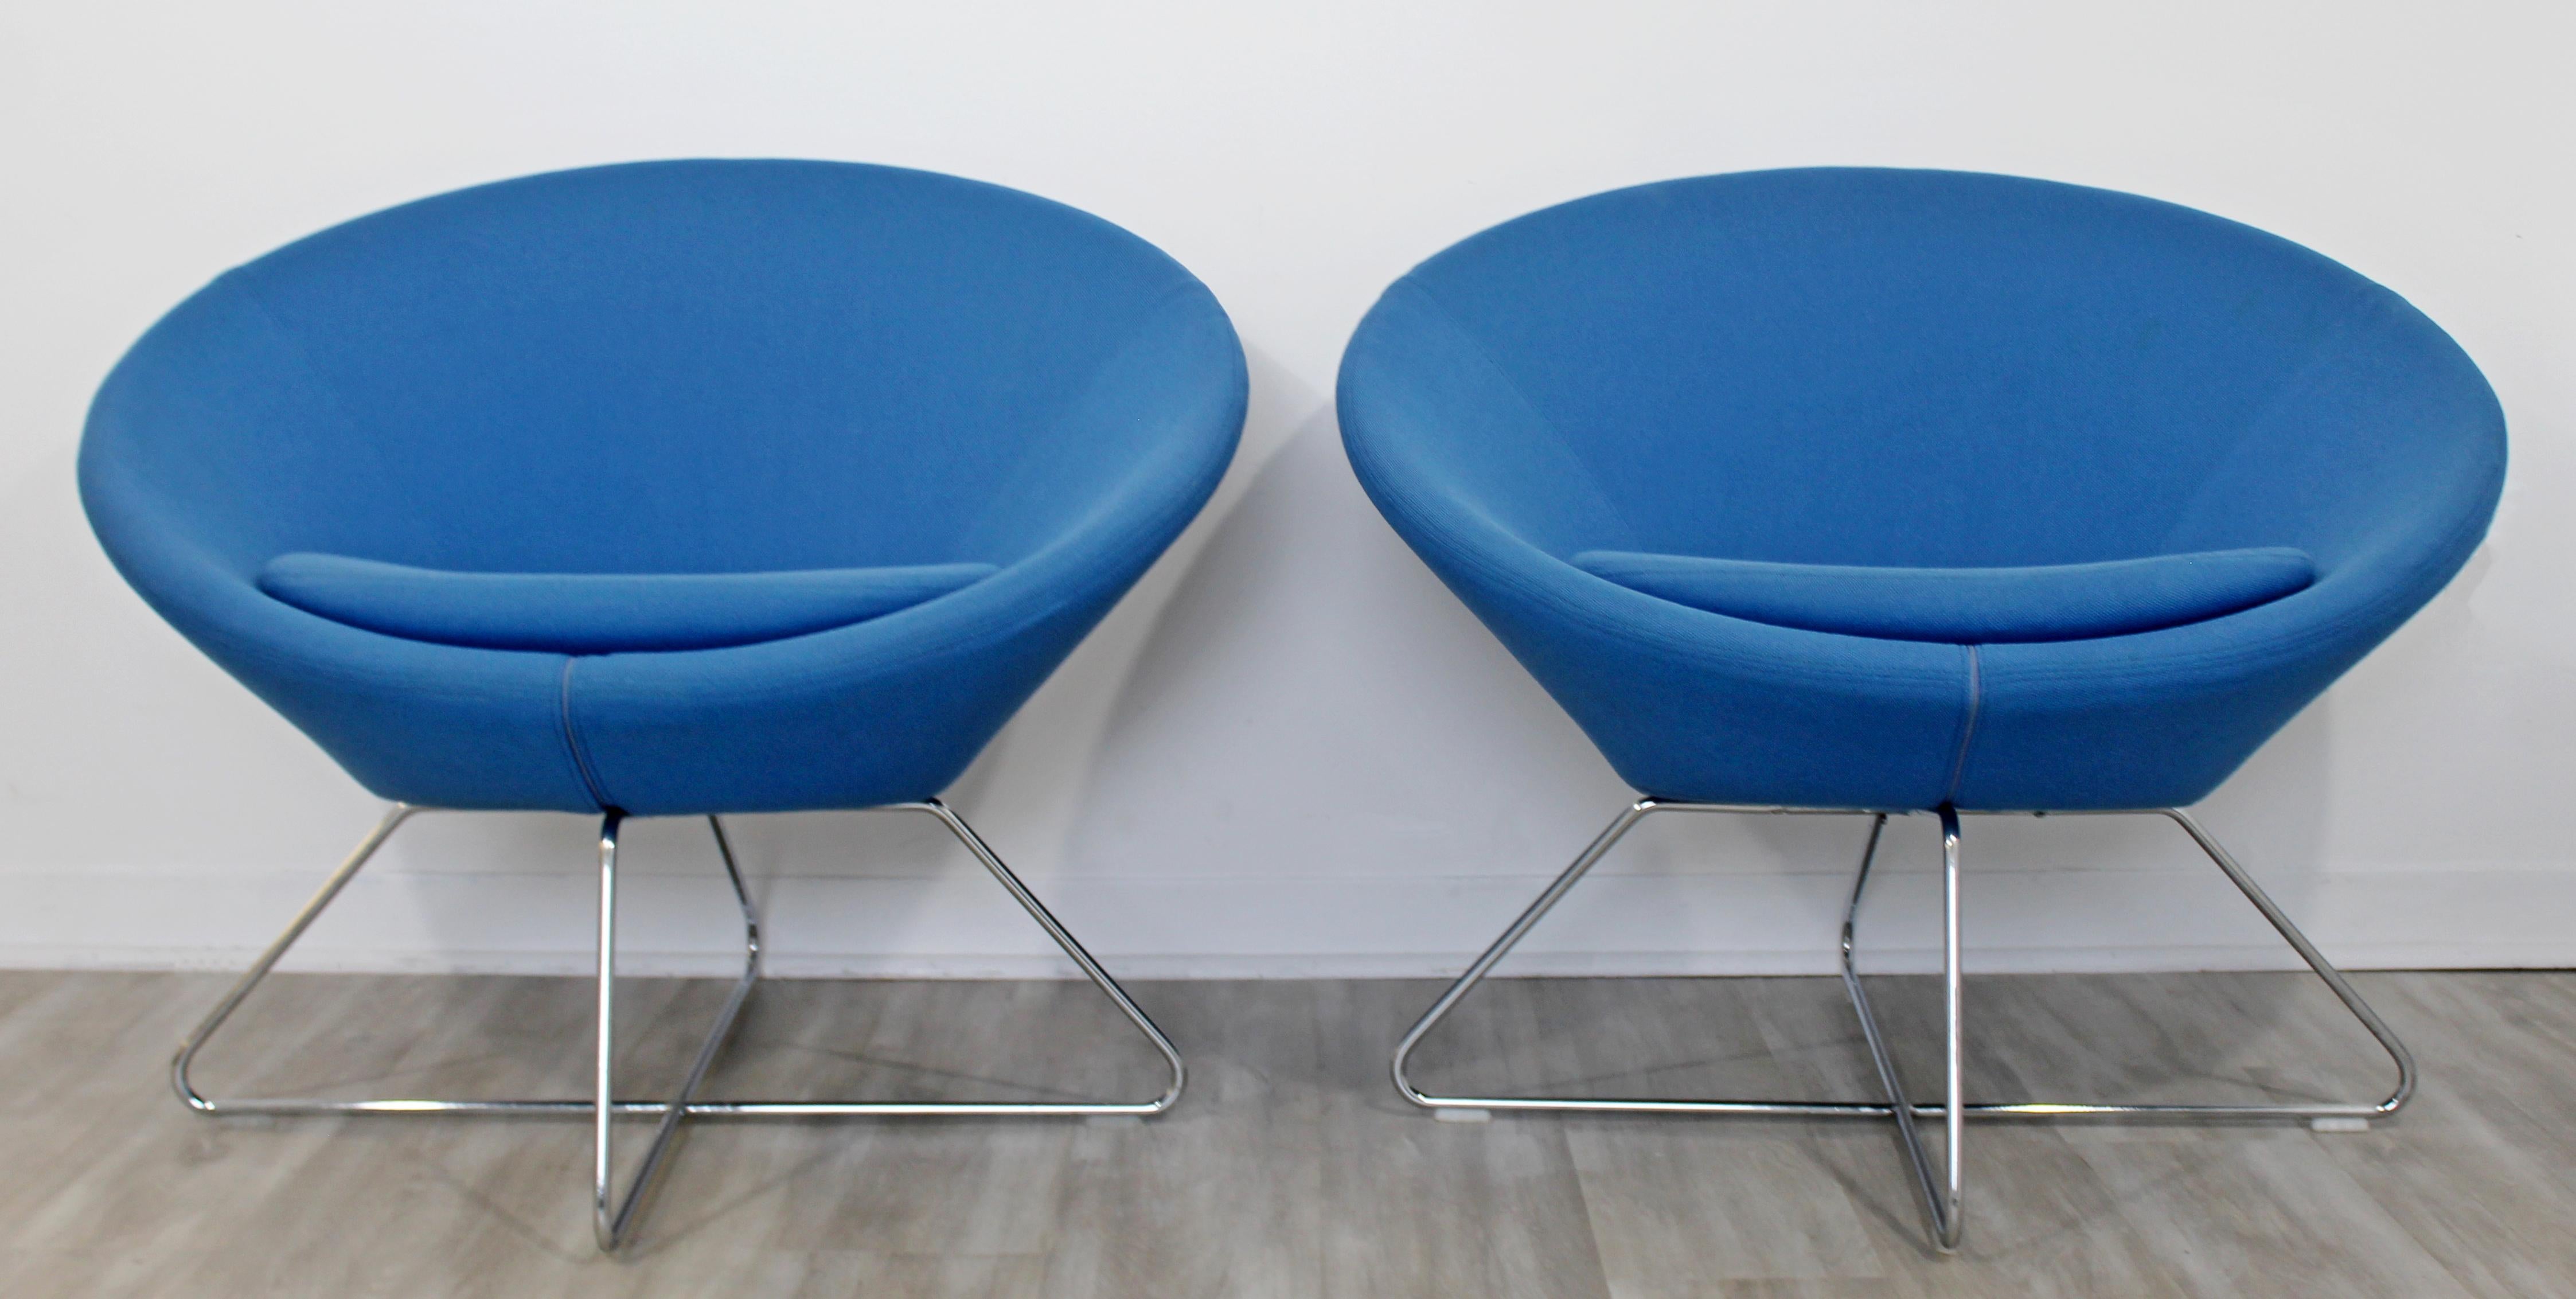 For your consideration is a chic pair of blue lounge or accent chairs, on chrome bases, by Allermuir. In excellent condition. The dimensions are 34.5